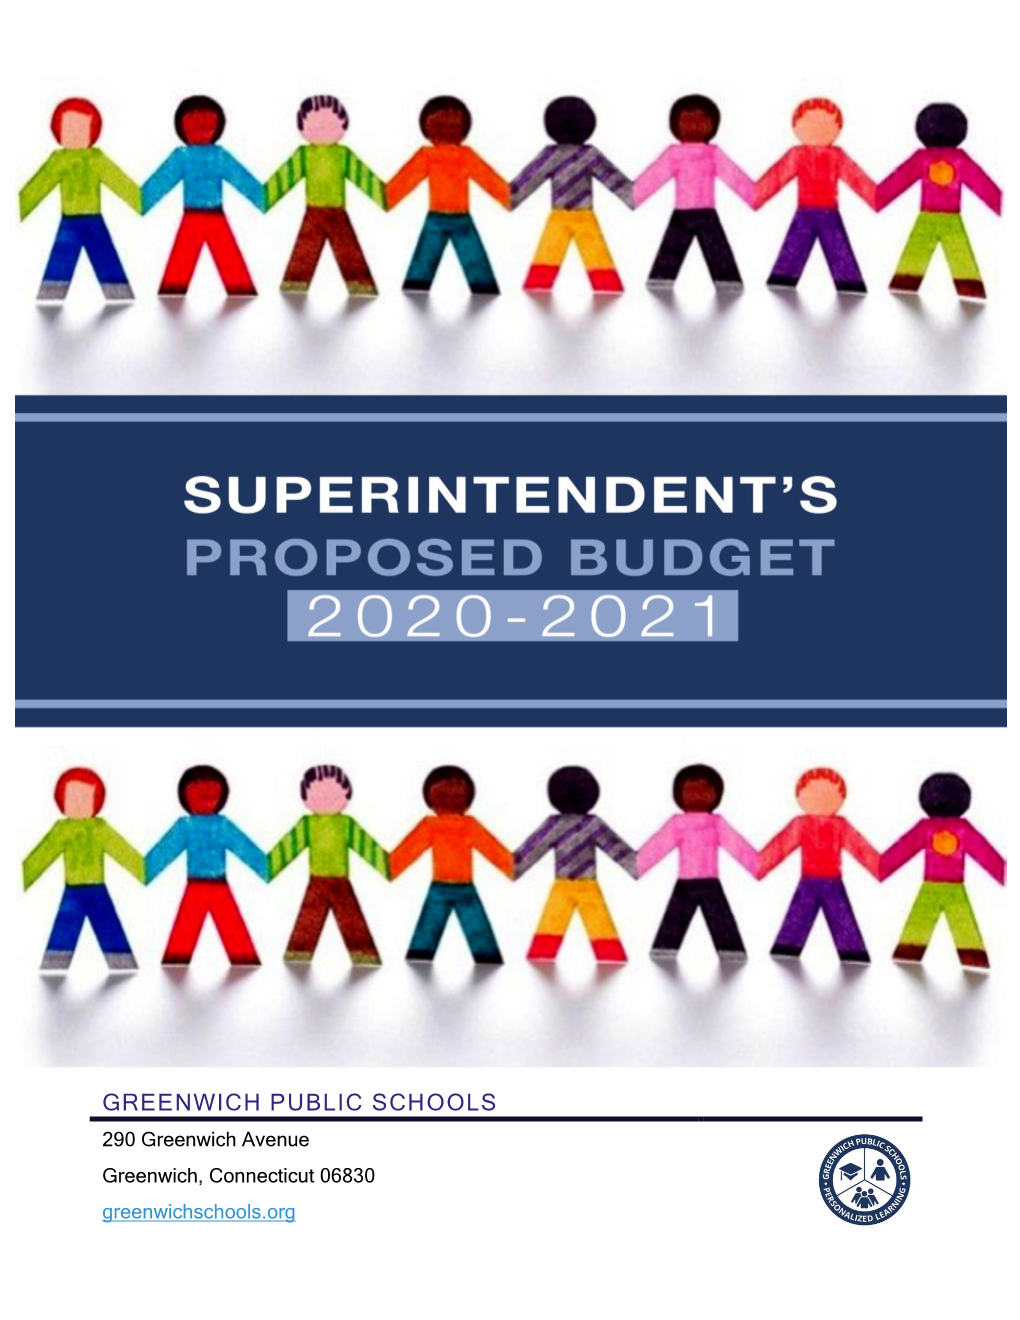 Superintendent's Proposed 2020-2021 Budget